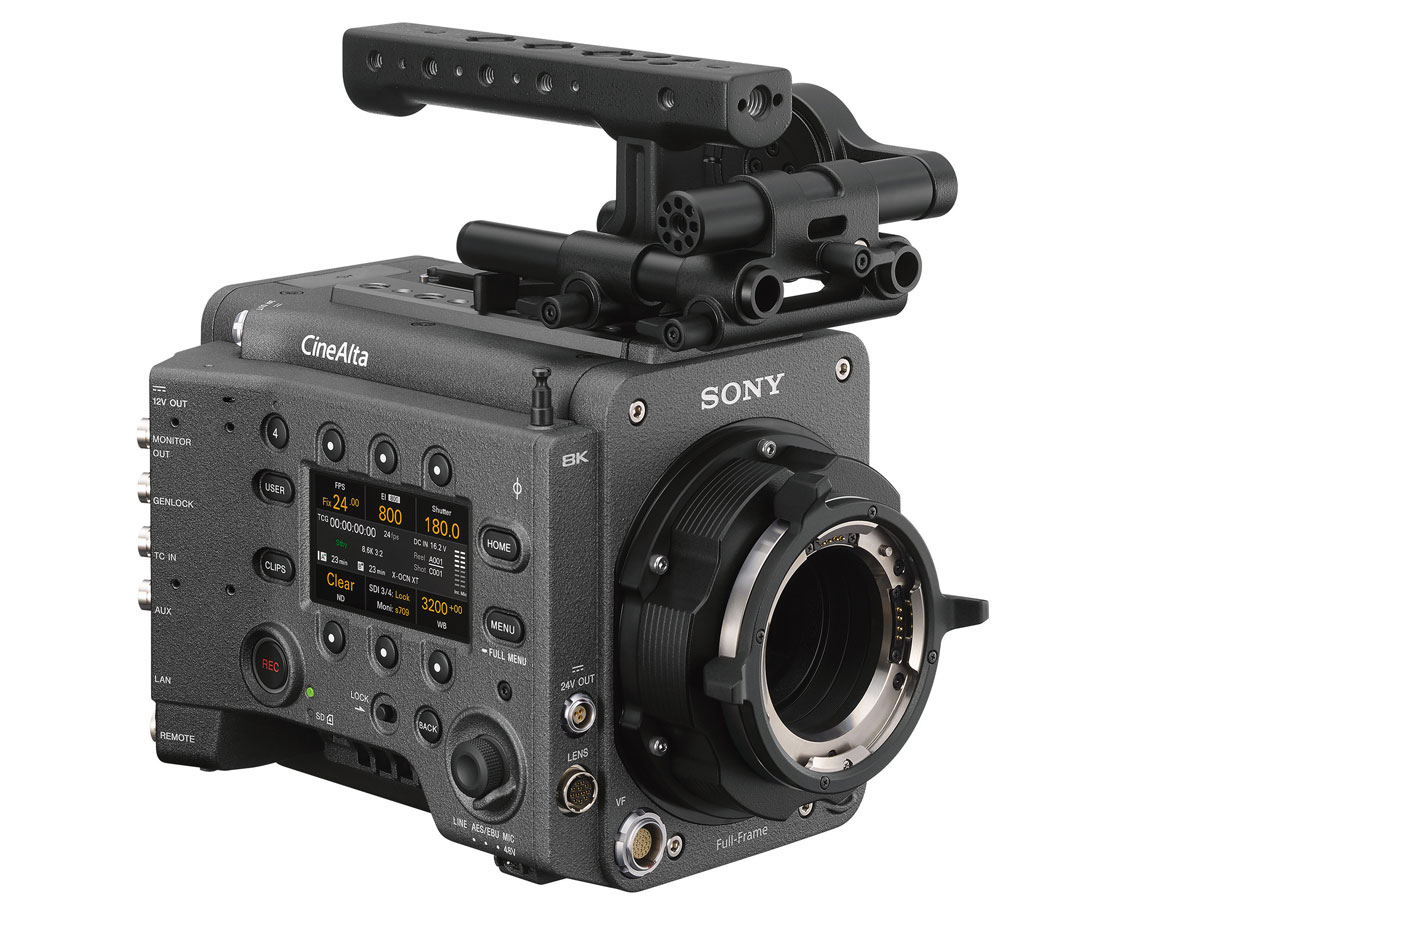 Sony shows firmware updates to Cinema Line at Cine Gear Expo